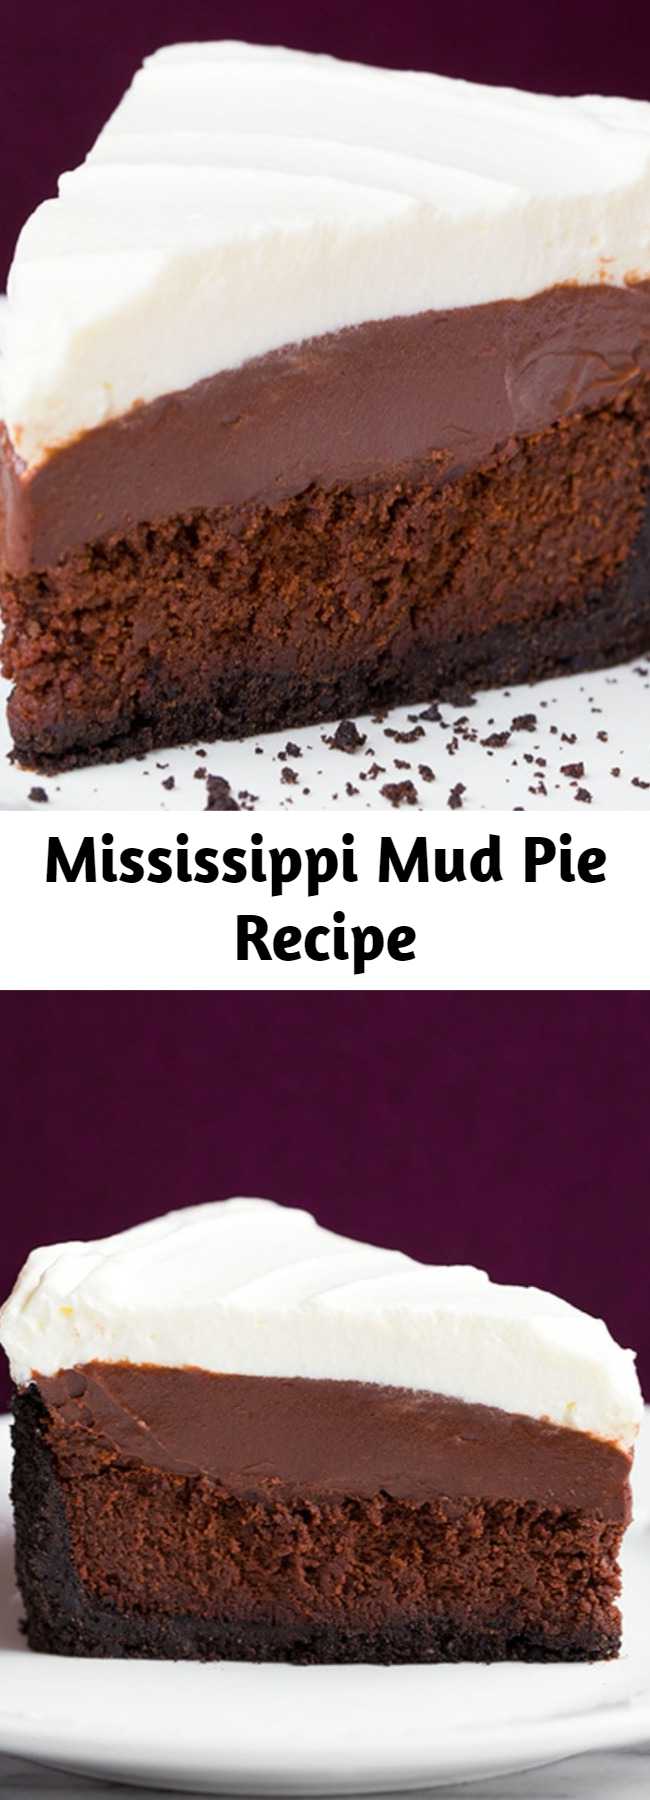 Mississipi Mud Pie – Four layers of utter decadence! You get a crisp Oreo crust, a rich fudgy cake layer, a creamy chocolate pudding and it's finished with a fluffy whipped cream.